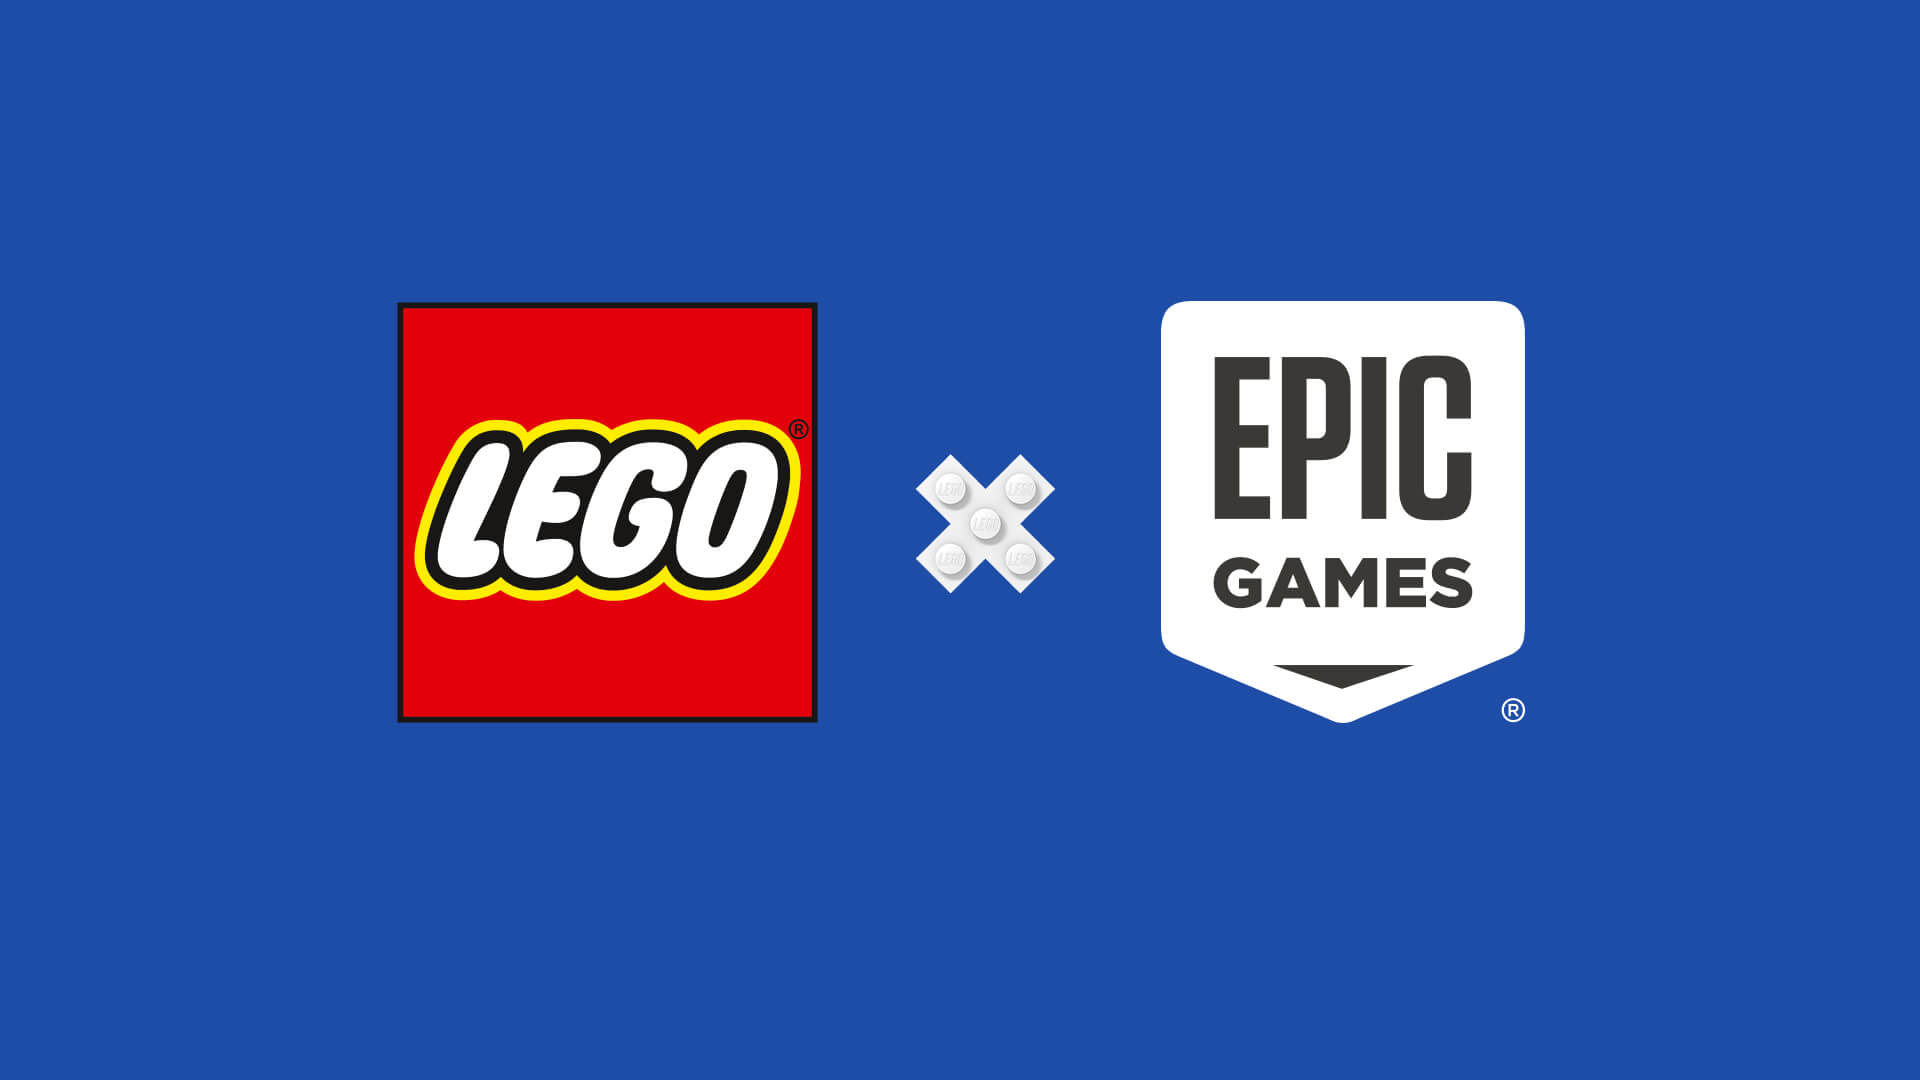 Epic Games Secures $2 Billion From Sony And LEGO To Build ‘Child-Friendly’ Metaverse